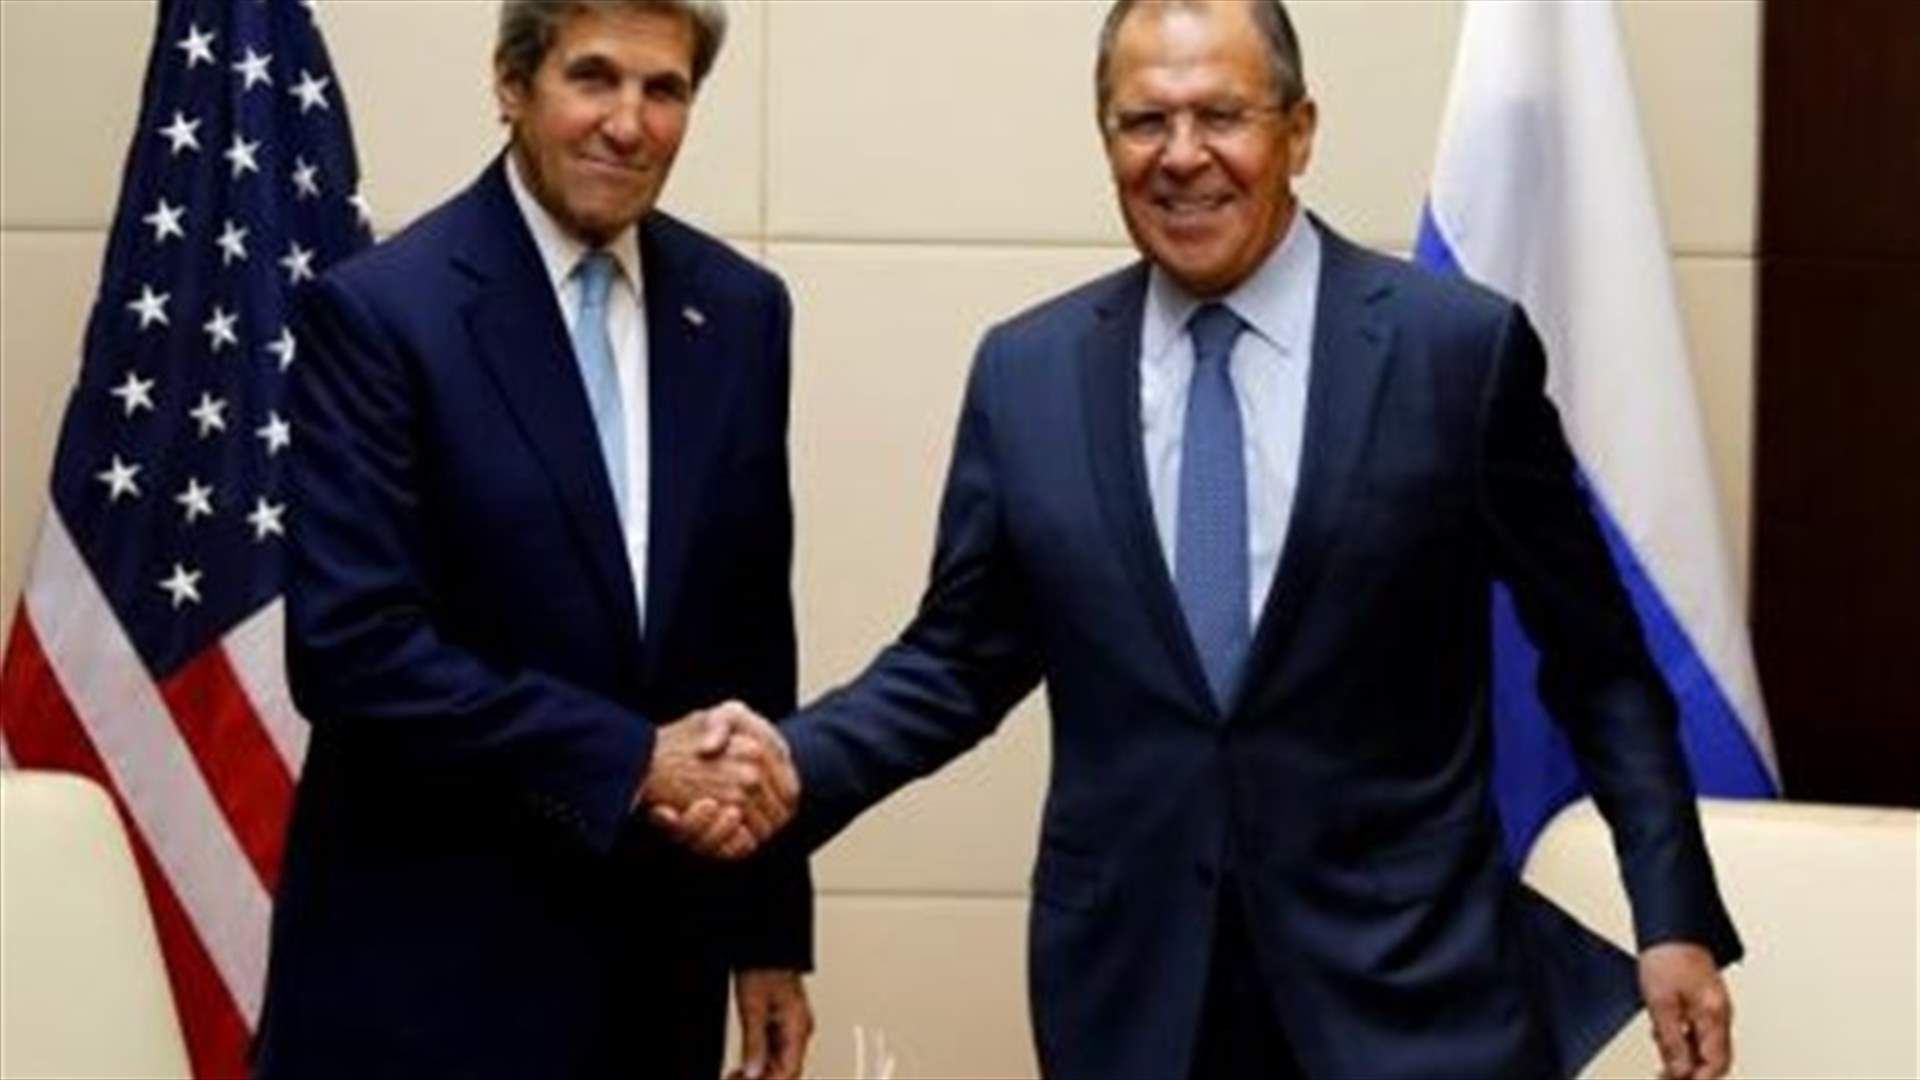 Kerry hopes to work with Russia on Syria, U.N. aims to restart talks